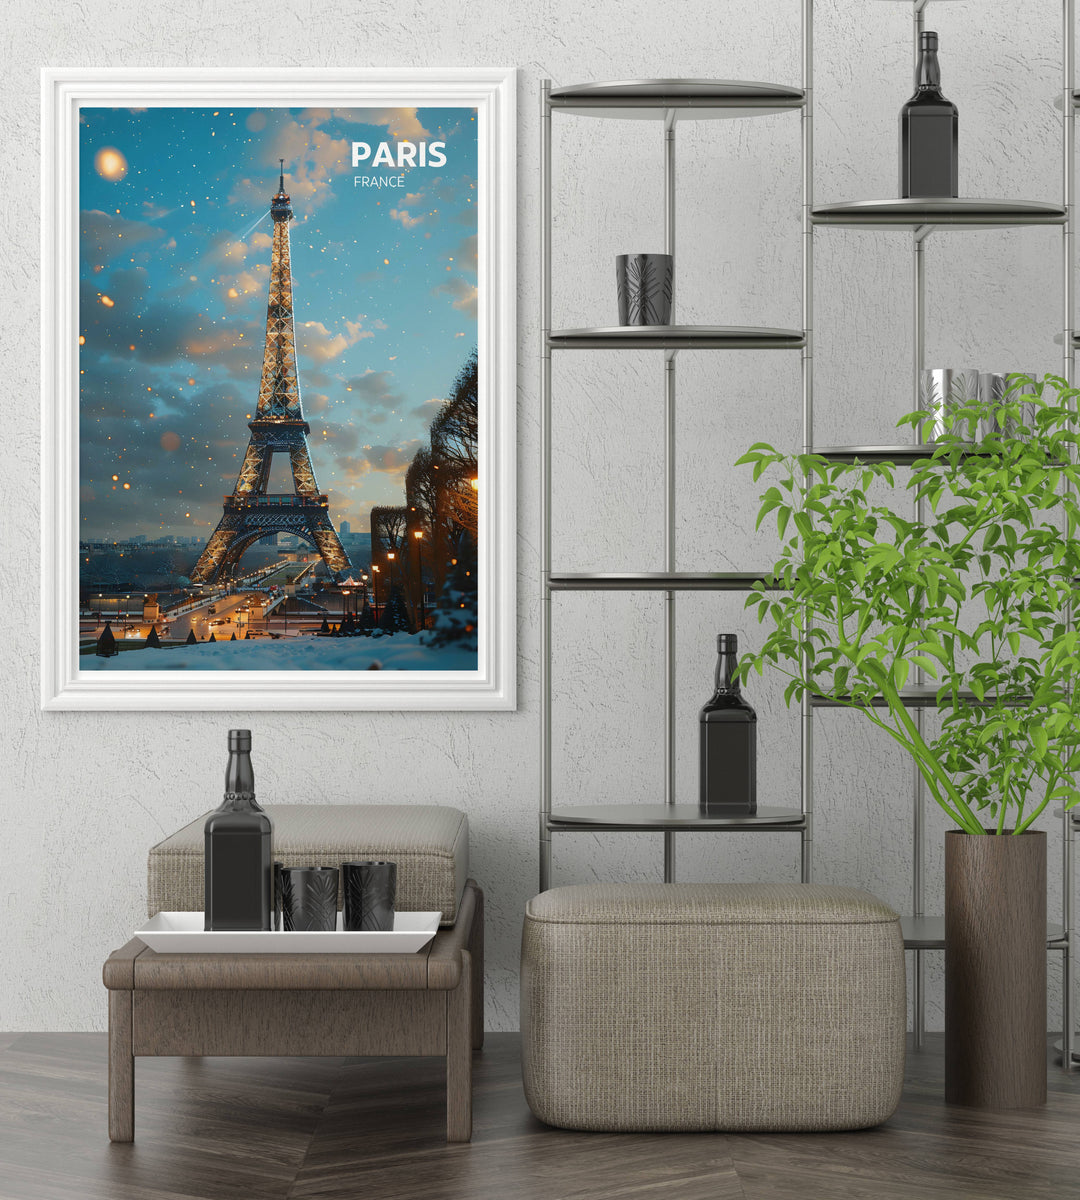 Elevate your decor with our Paris Wall Art collection, featuring stunning views of the Eiffel Tower and other iconic landmarks.